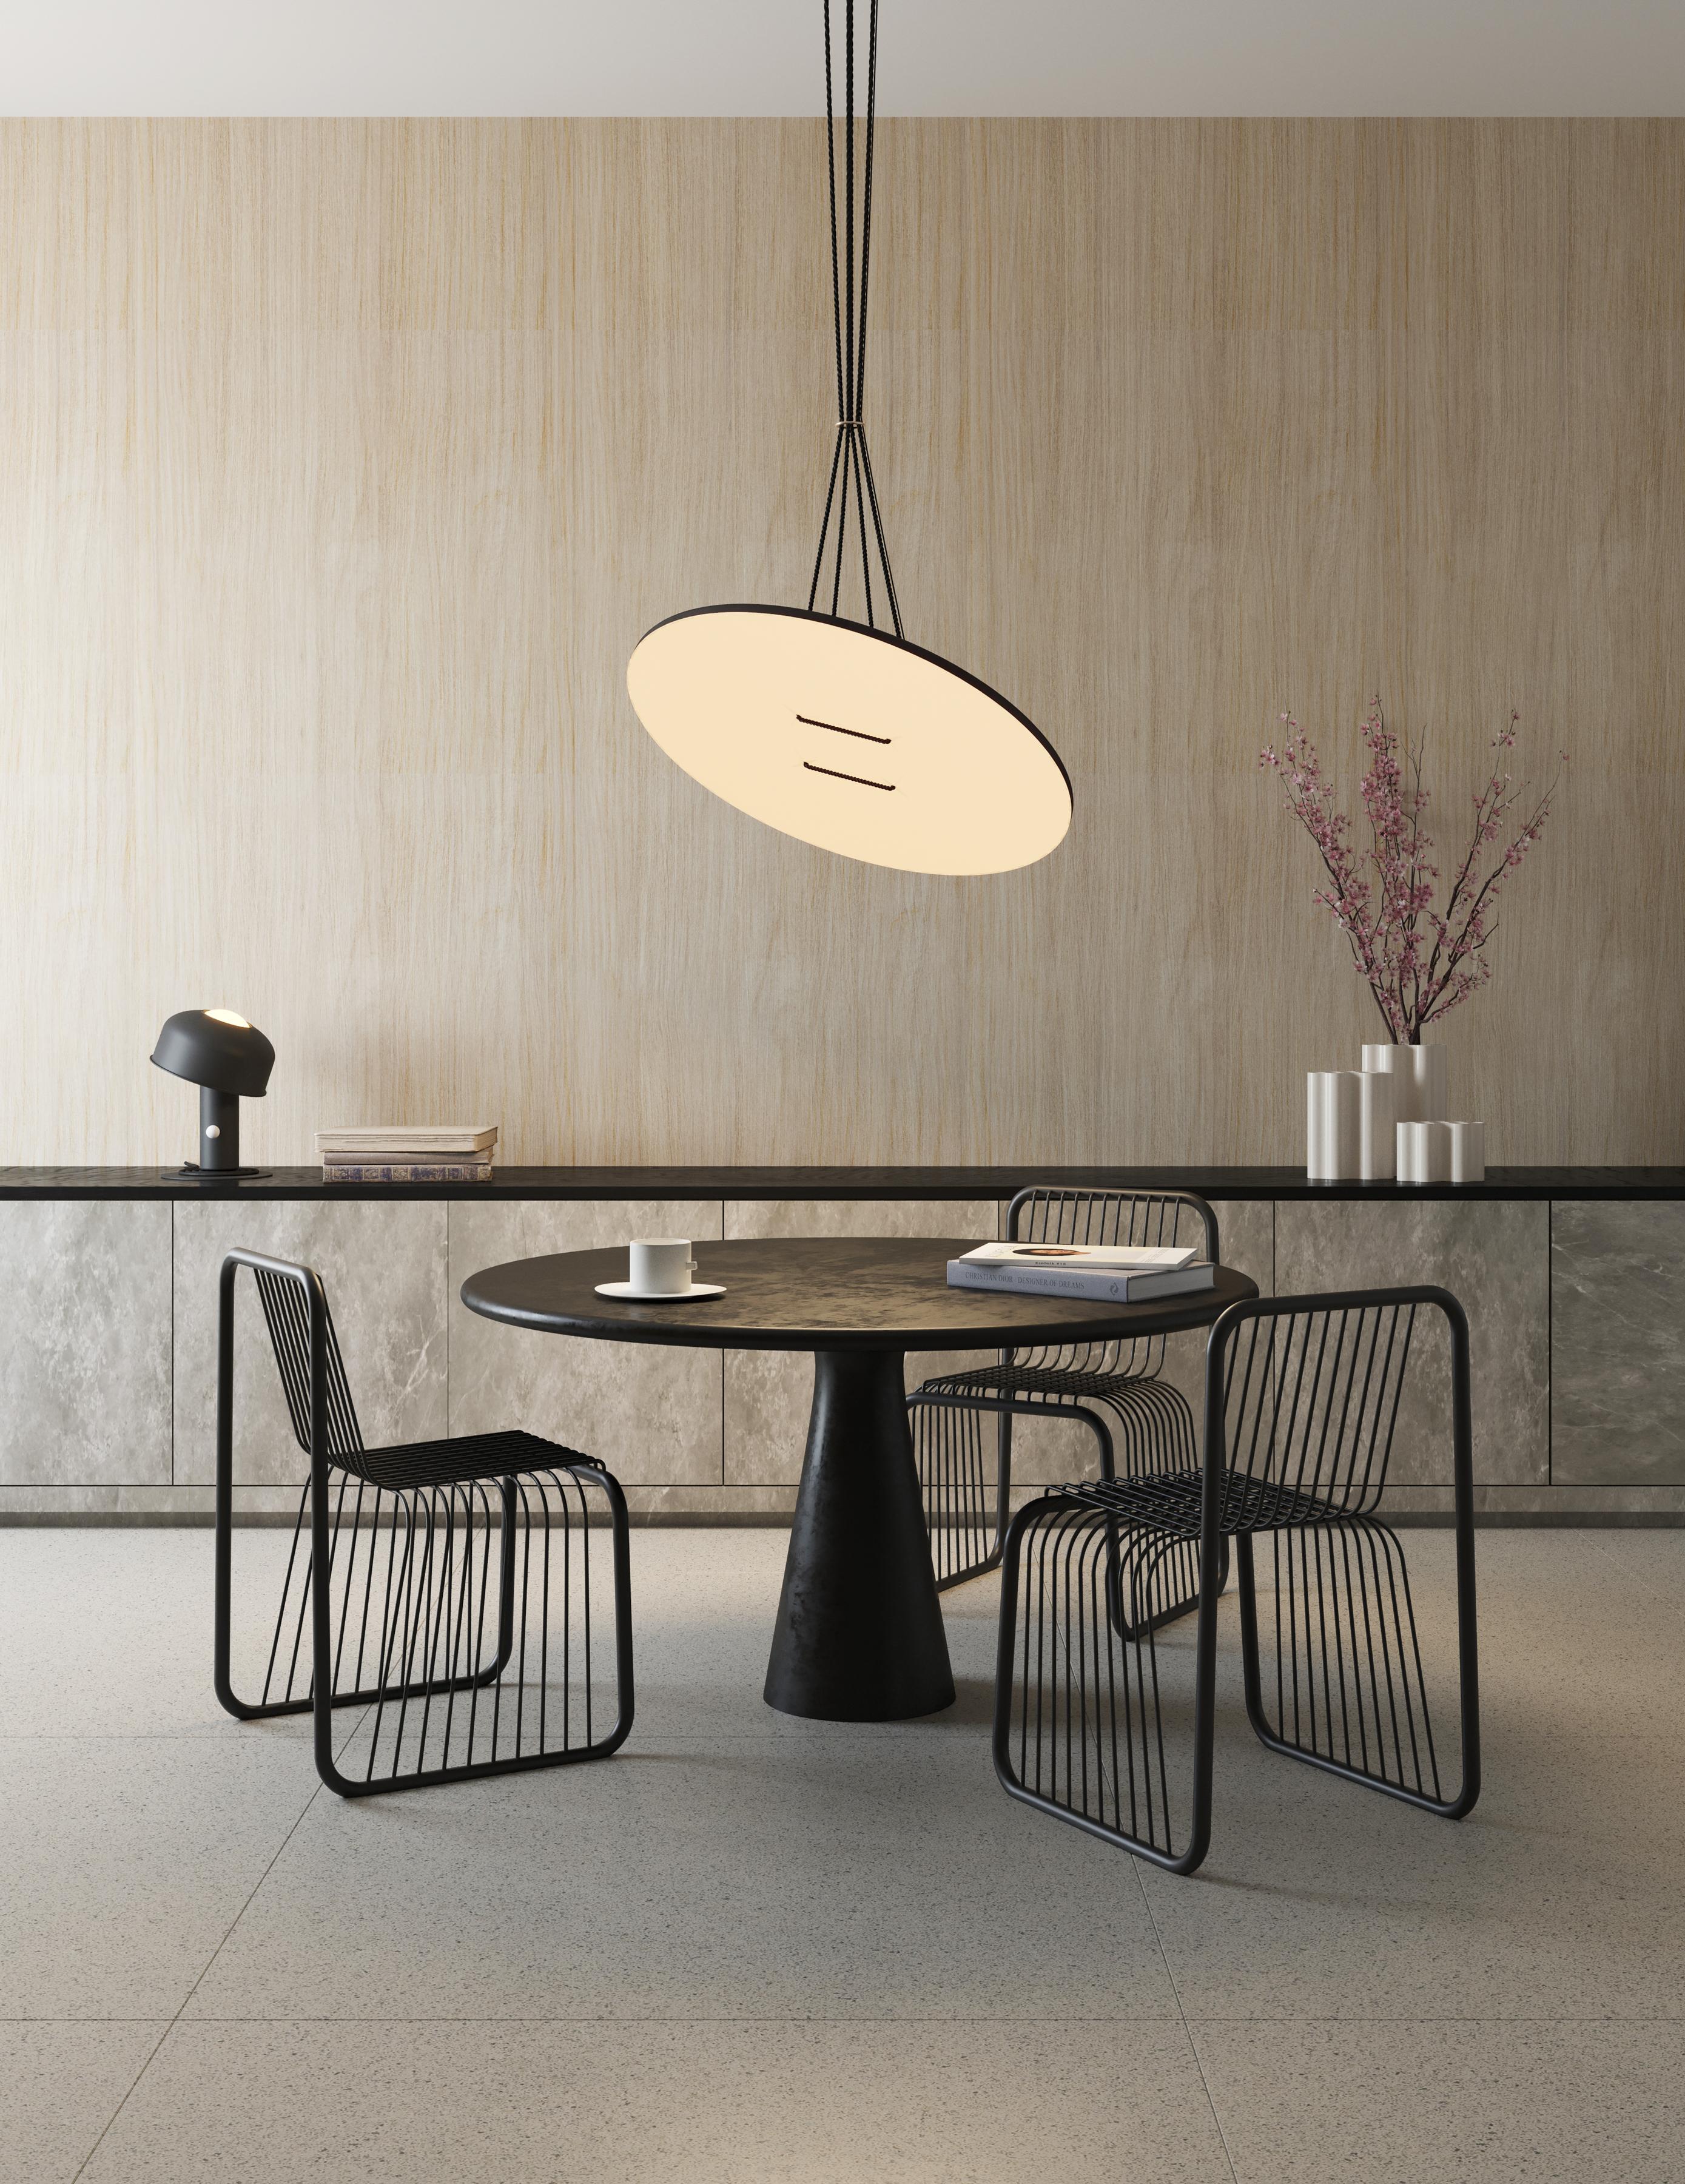 Contemporary pendant lamp 'button'
by ANDlight

ELECTRICAL
– 25W LED Panel
– 50,000 hour Lifetime
– 90+ CRI
– Input Voltage: 120V, 230V + 277V
– Integral 12V DC power supply included

The model shown in picture:
- Diameter: 60 cm Height: